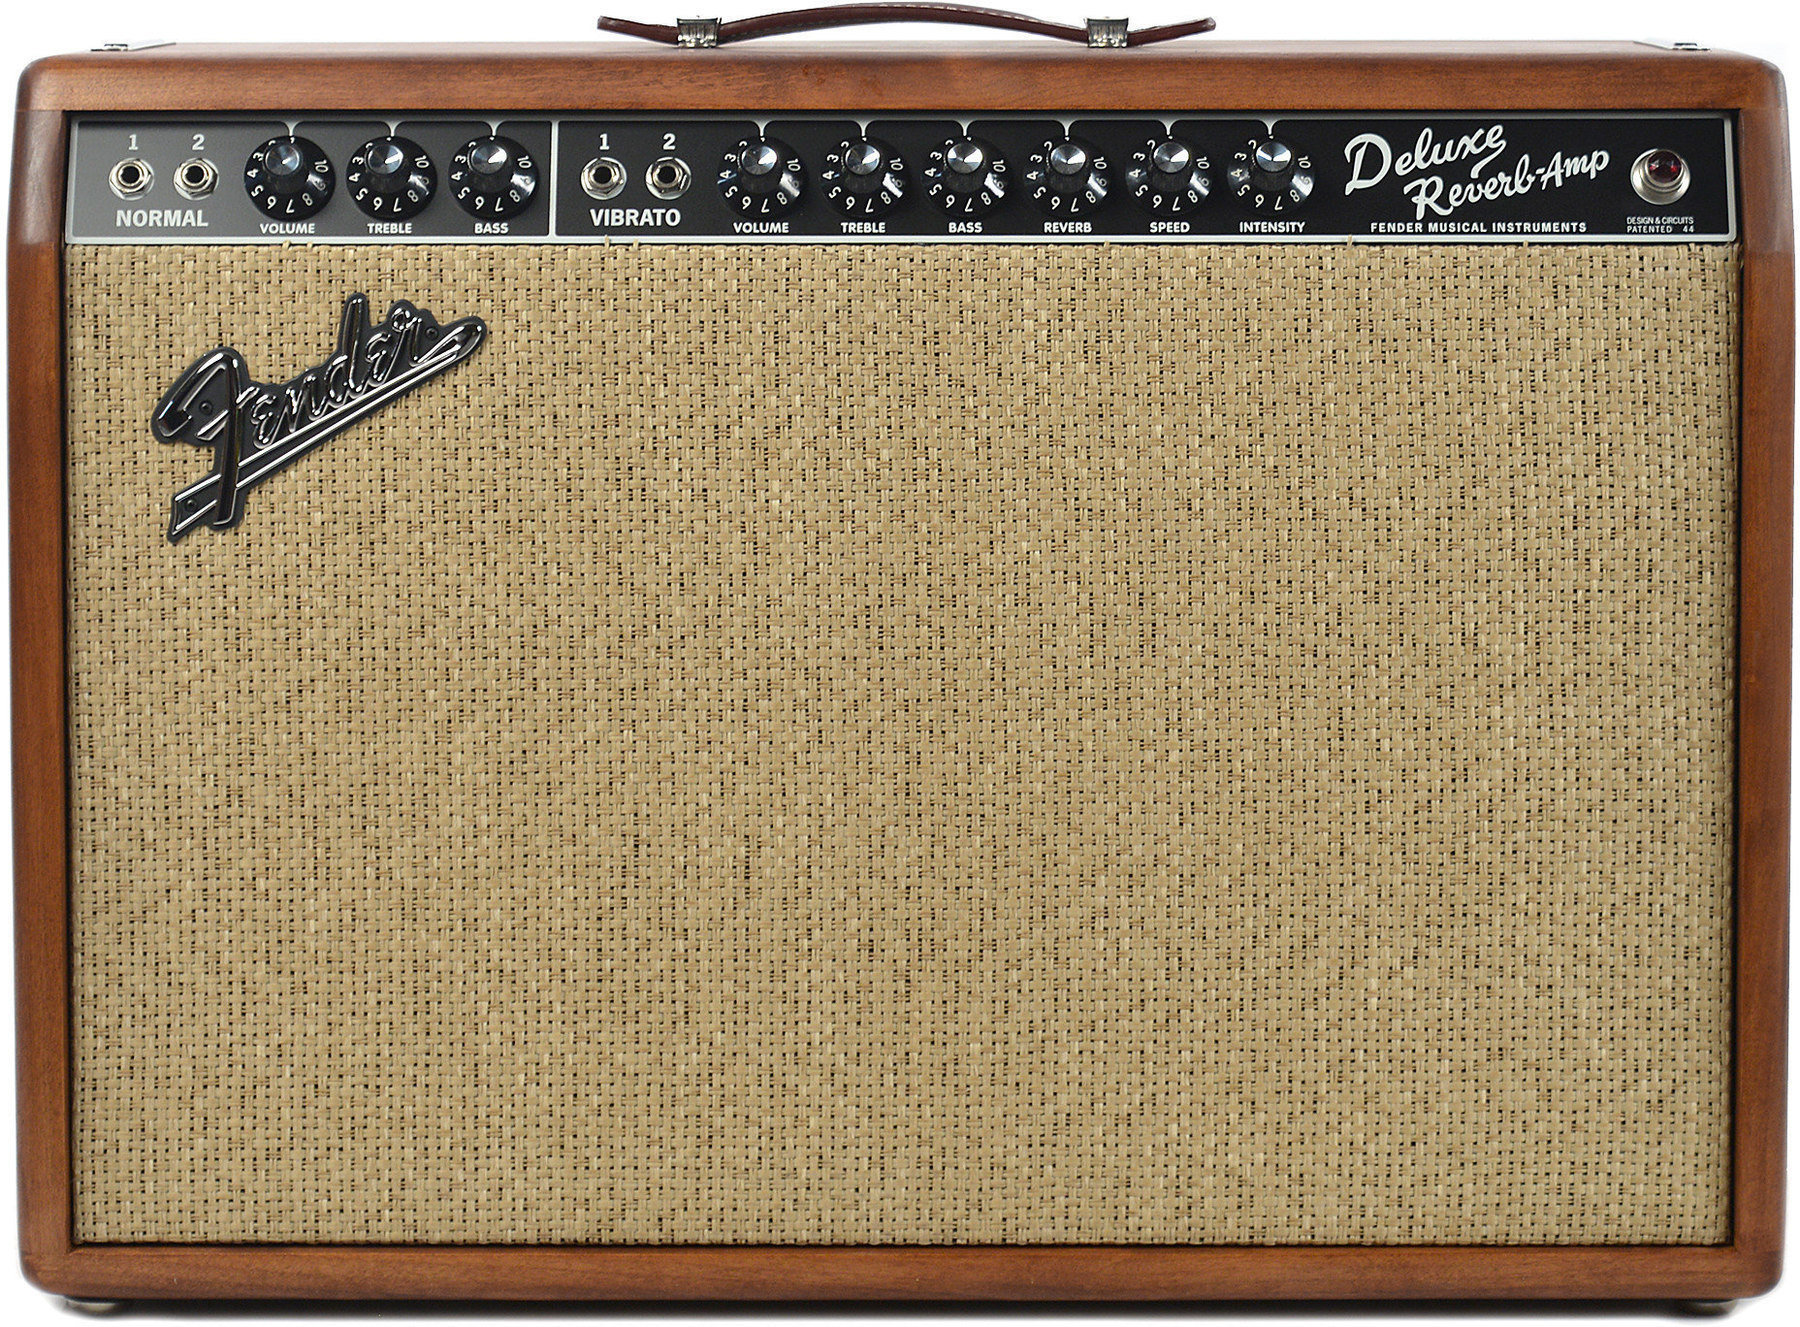 Combo à lampes Fender 65 Deluxe Reverb Knotty Pine